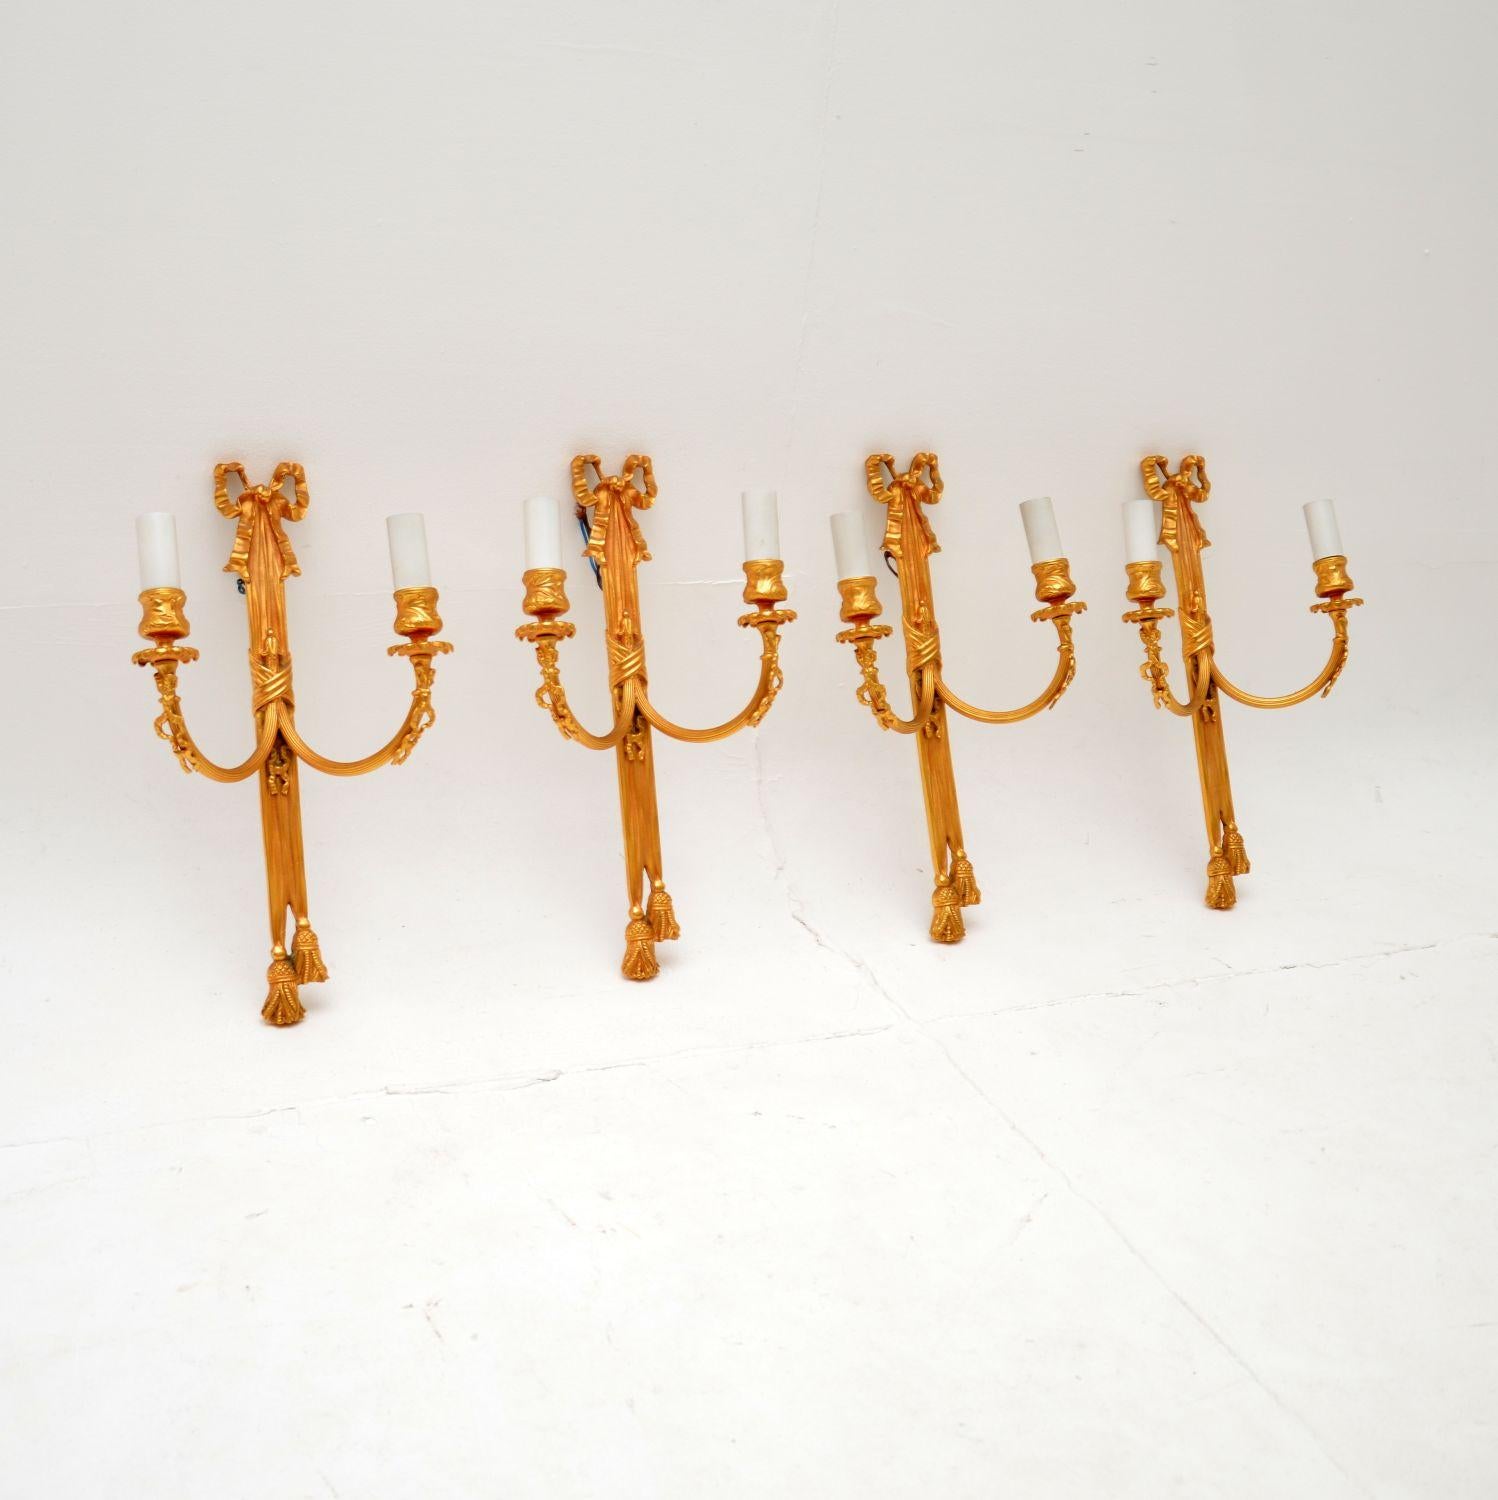 A stunning set of four antique gilt metal wall sconce lamps. They were made in England, they date from around the 1950’s.

The quality is excellent, they have very fine details and are beautifully designed as candelabra in the Adam style.

The